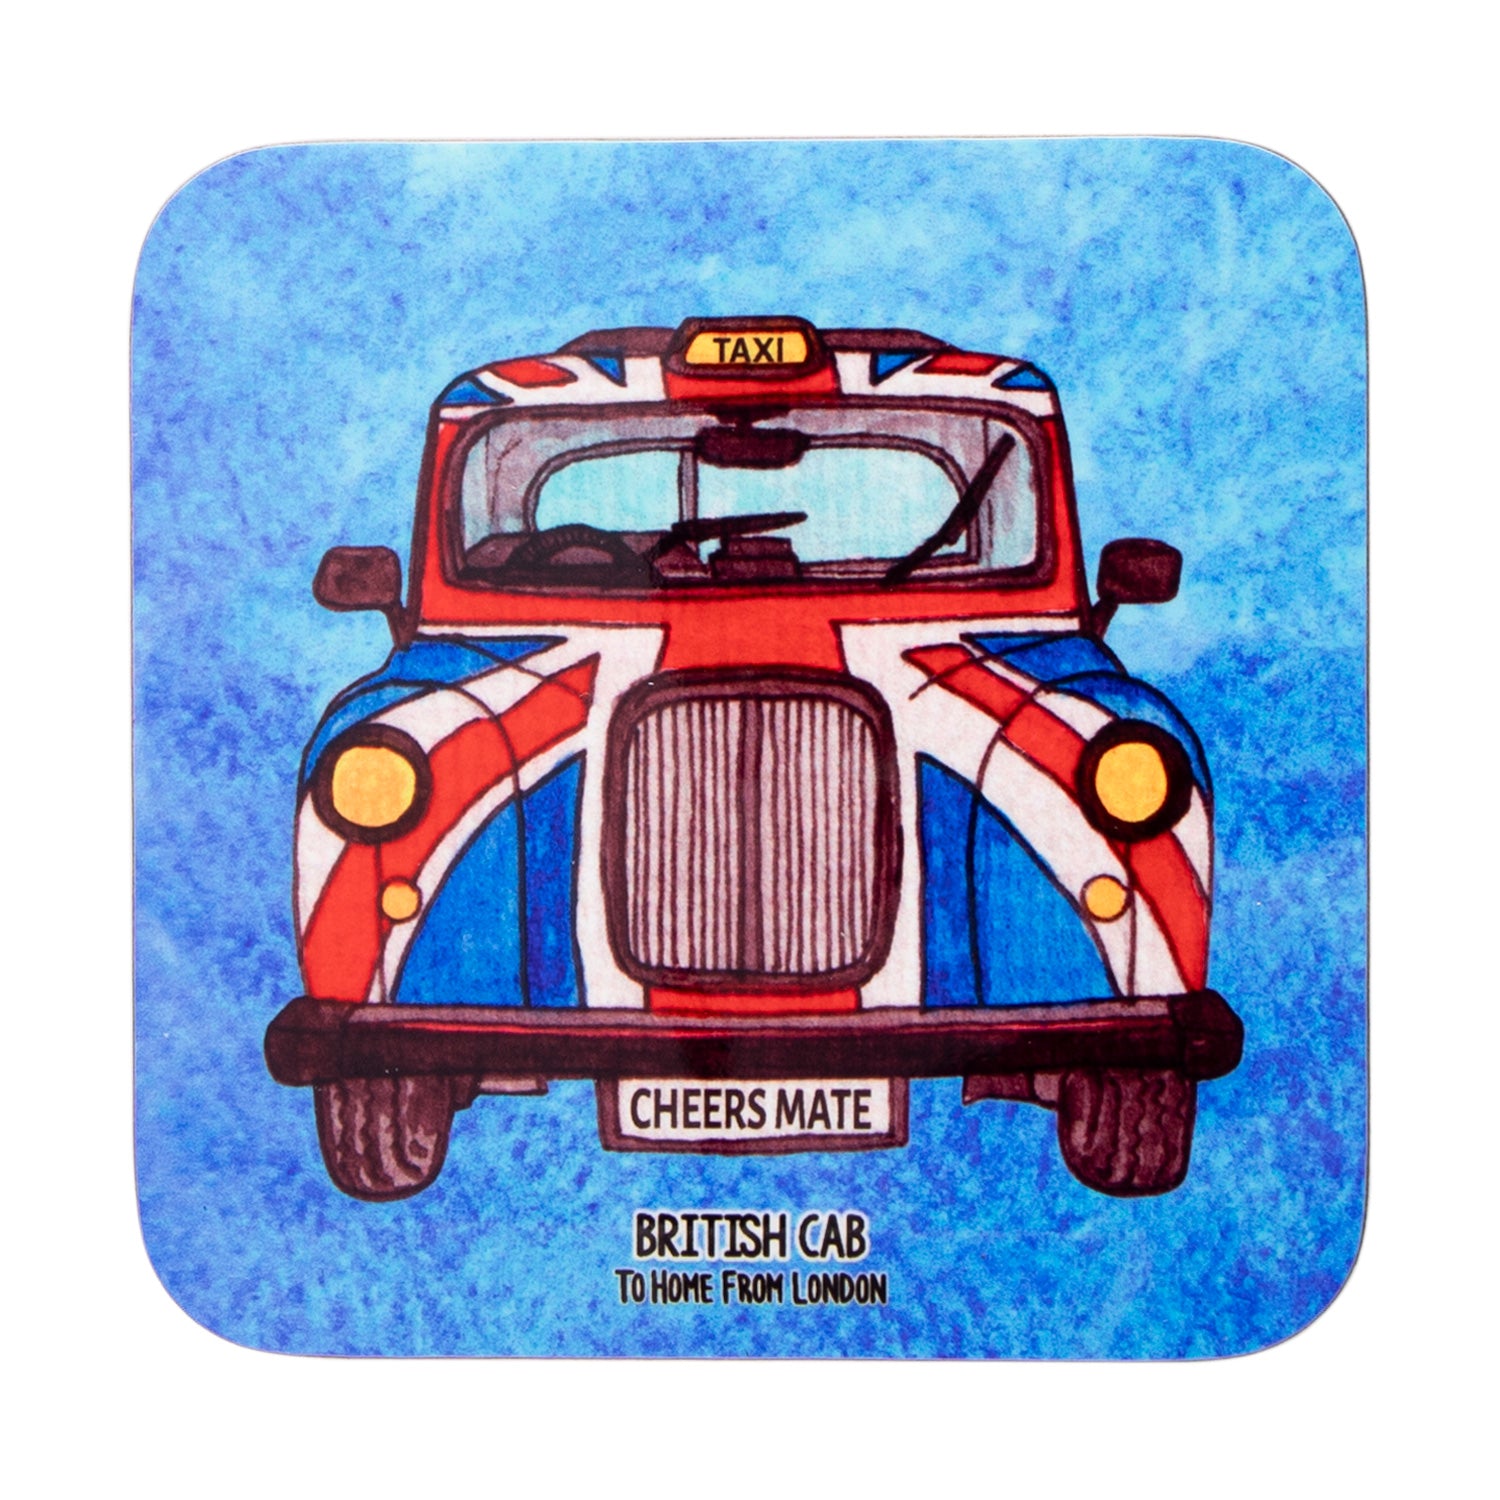 To Home From London Magnetic Coaster - British Cab